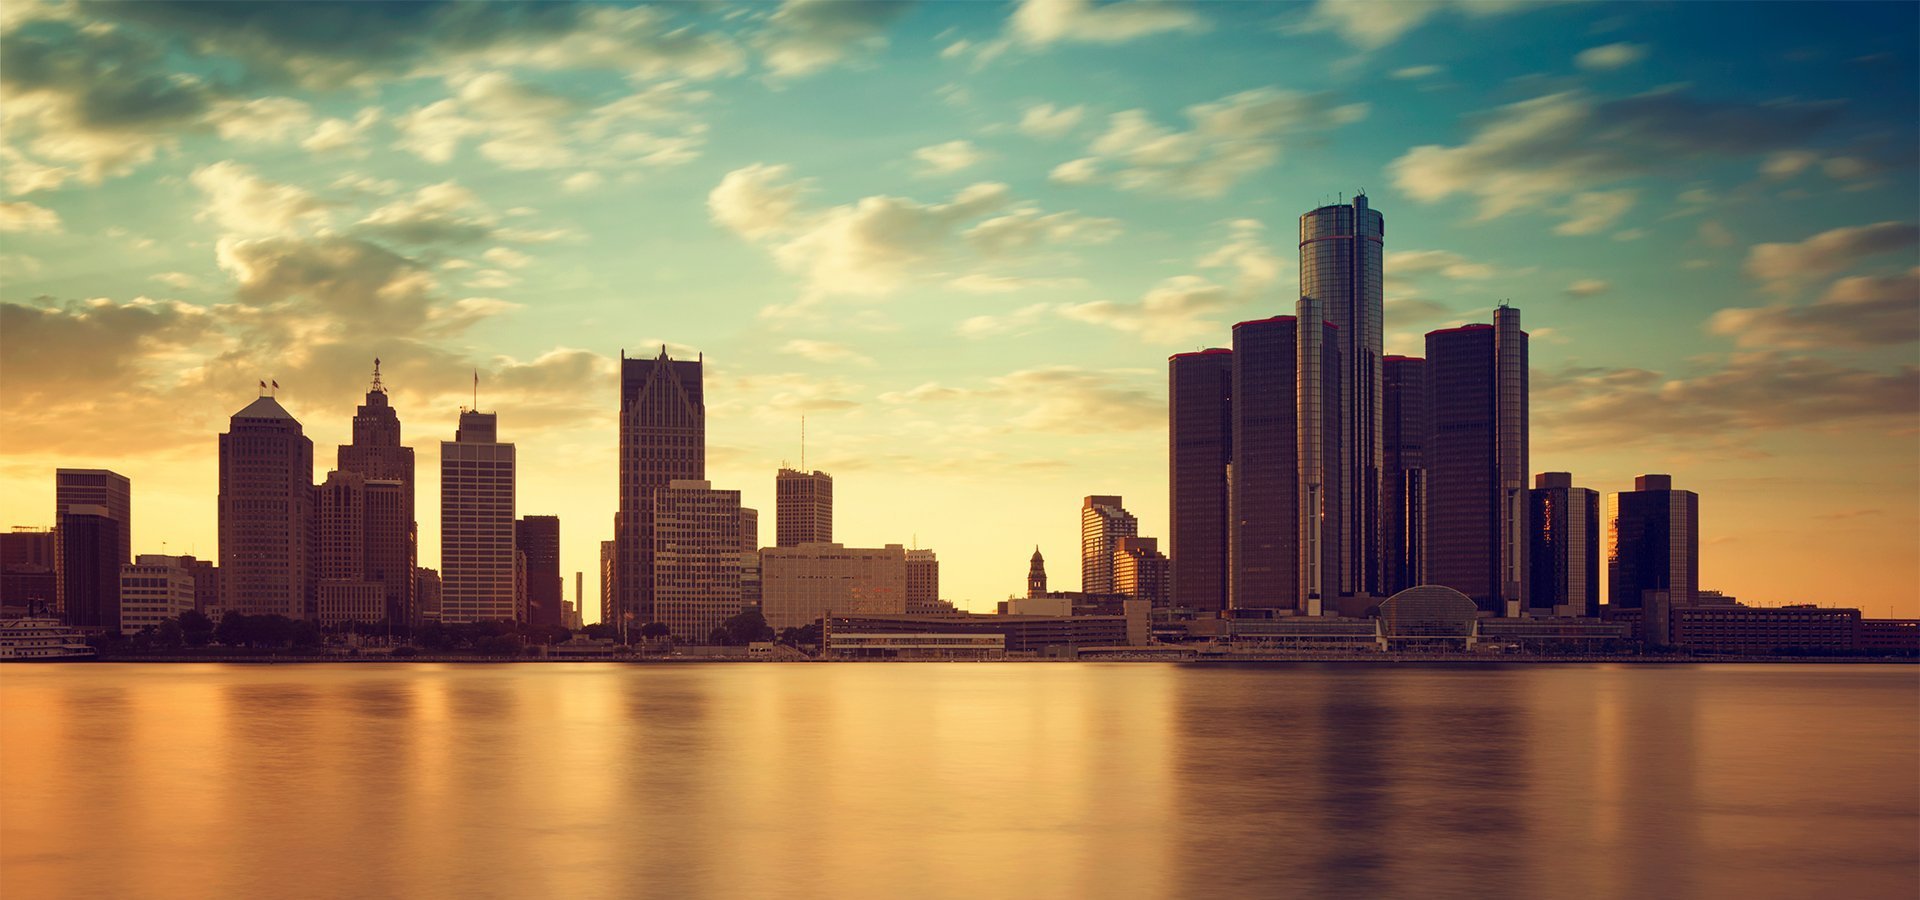 detroit skyline represents midwest recover center's ceo matt bell about detroit's union members' radio